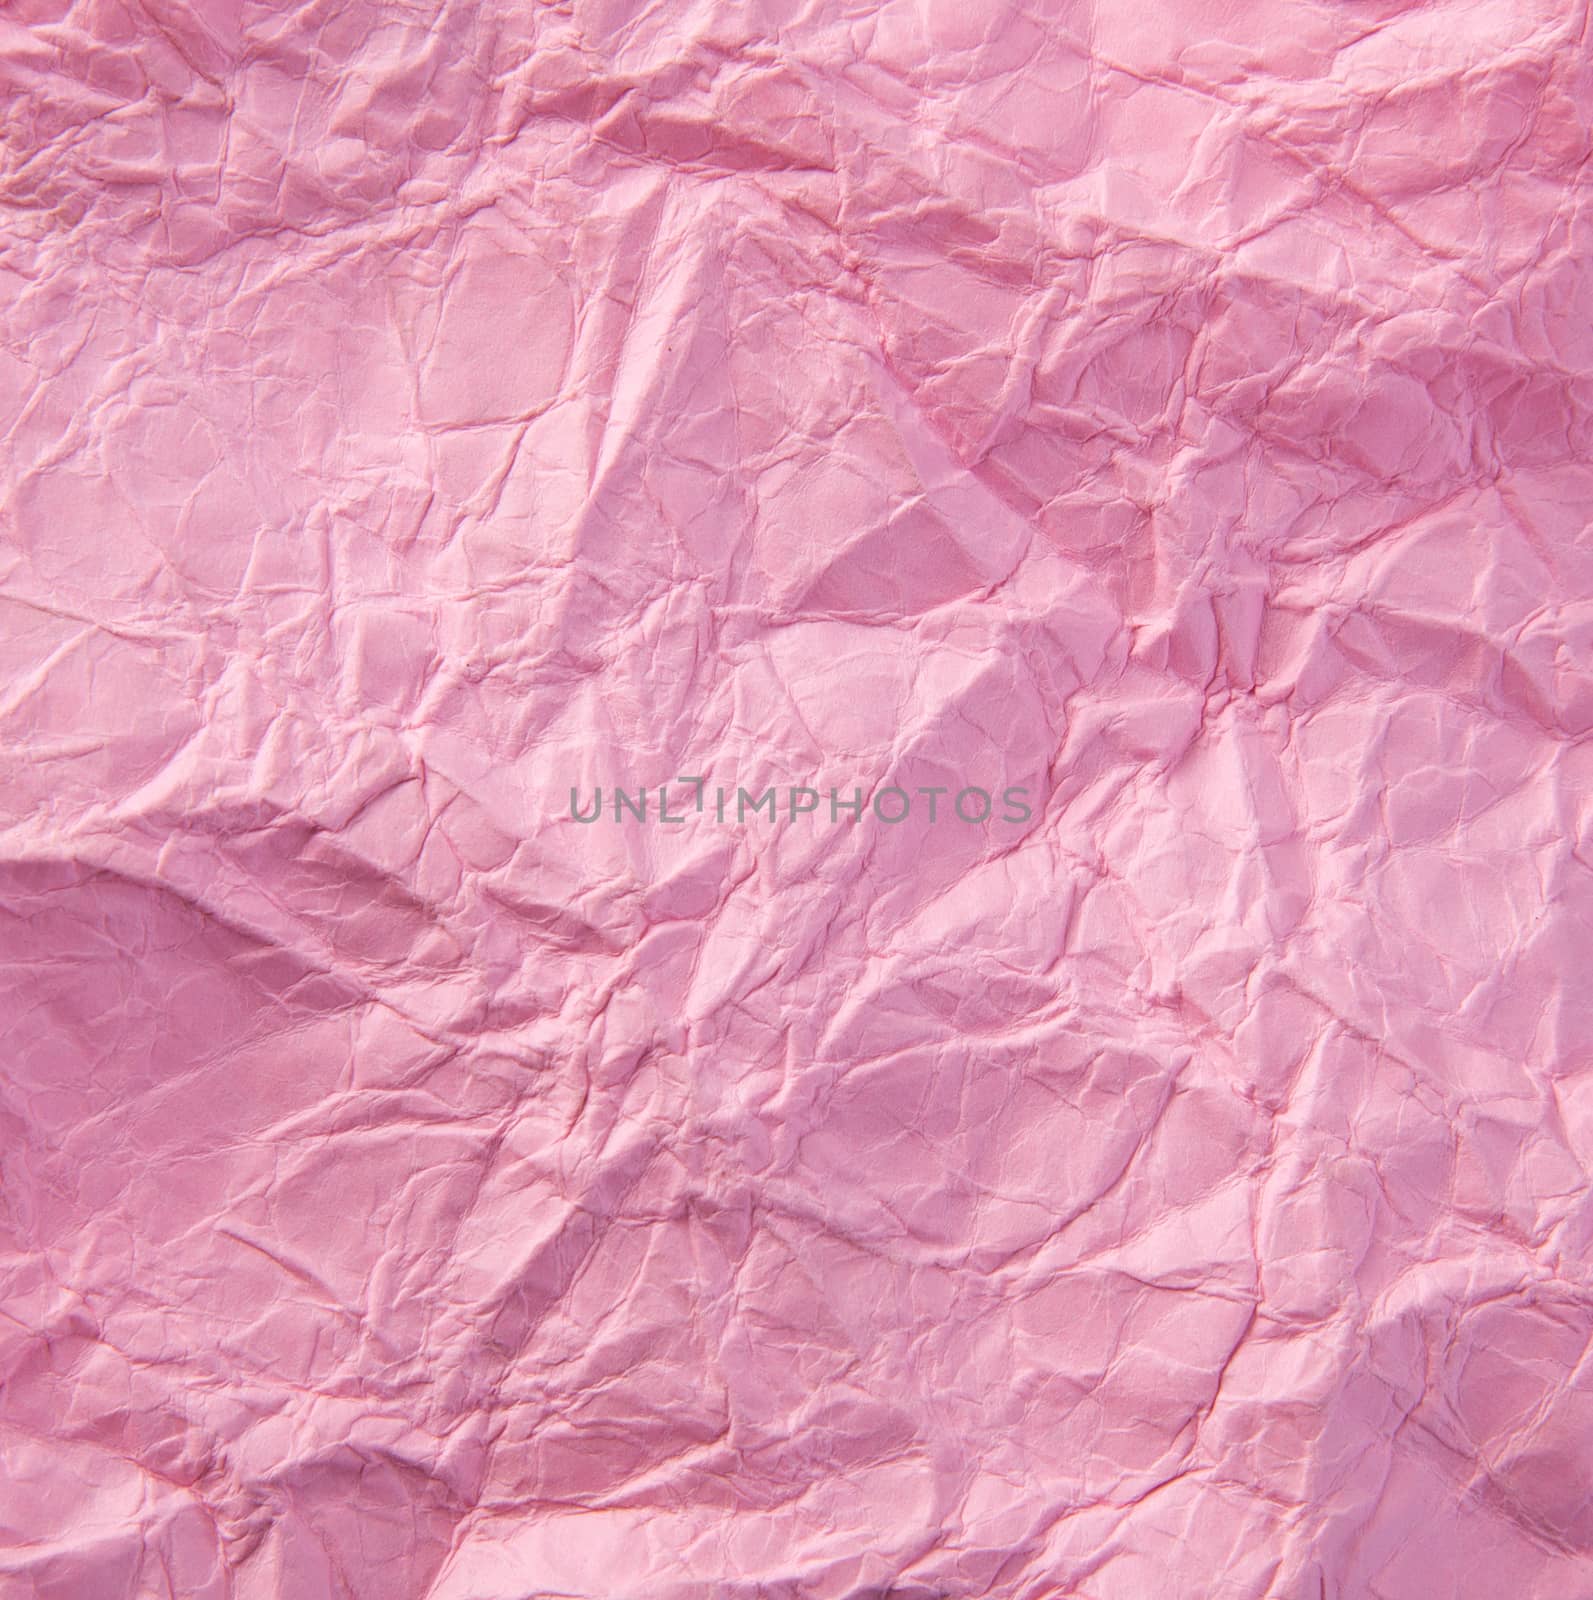 Crumpled paper texture background by tehcheesiong